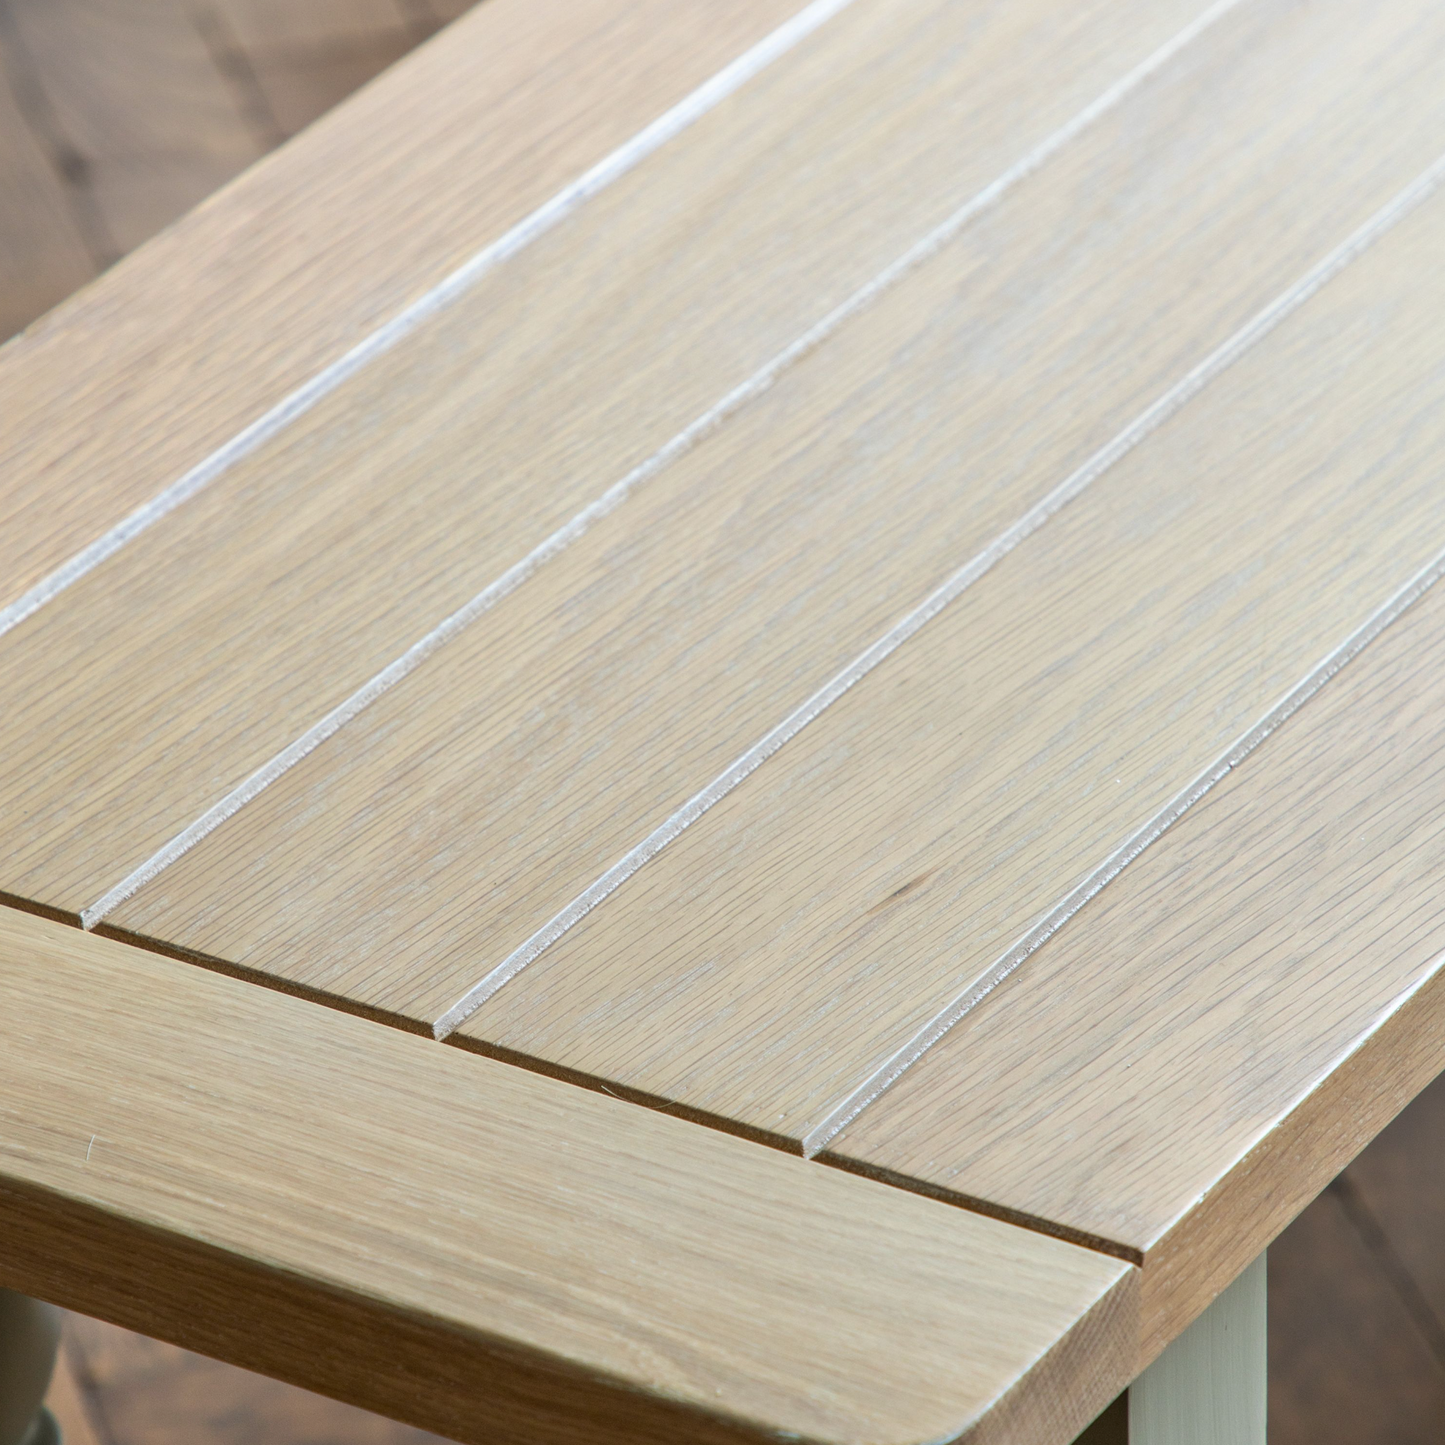 A close up of a Buckland Dining Bench 1500x380x450mm in Meteor by Kikiathome.co.uk on a wooden floor, perfect for interior decor and home furniture.